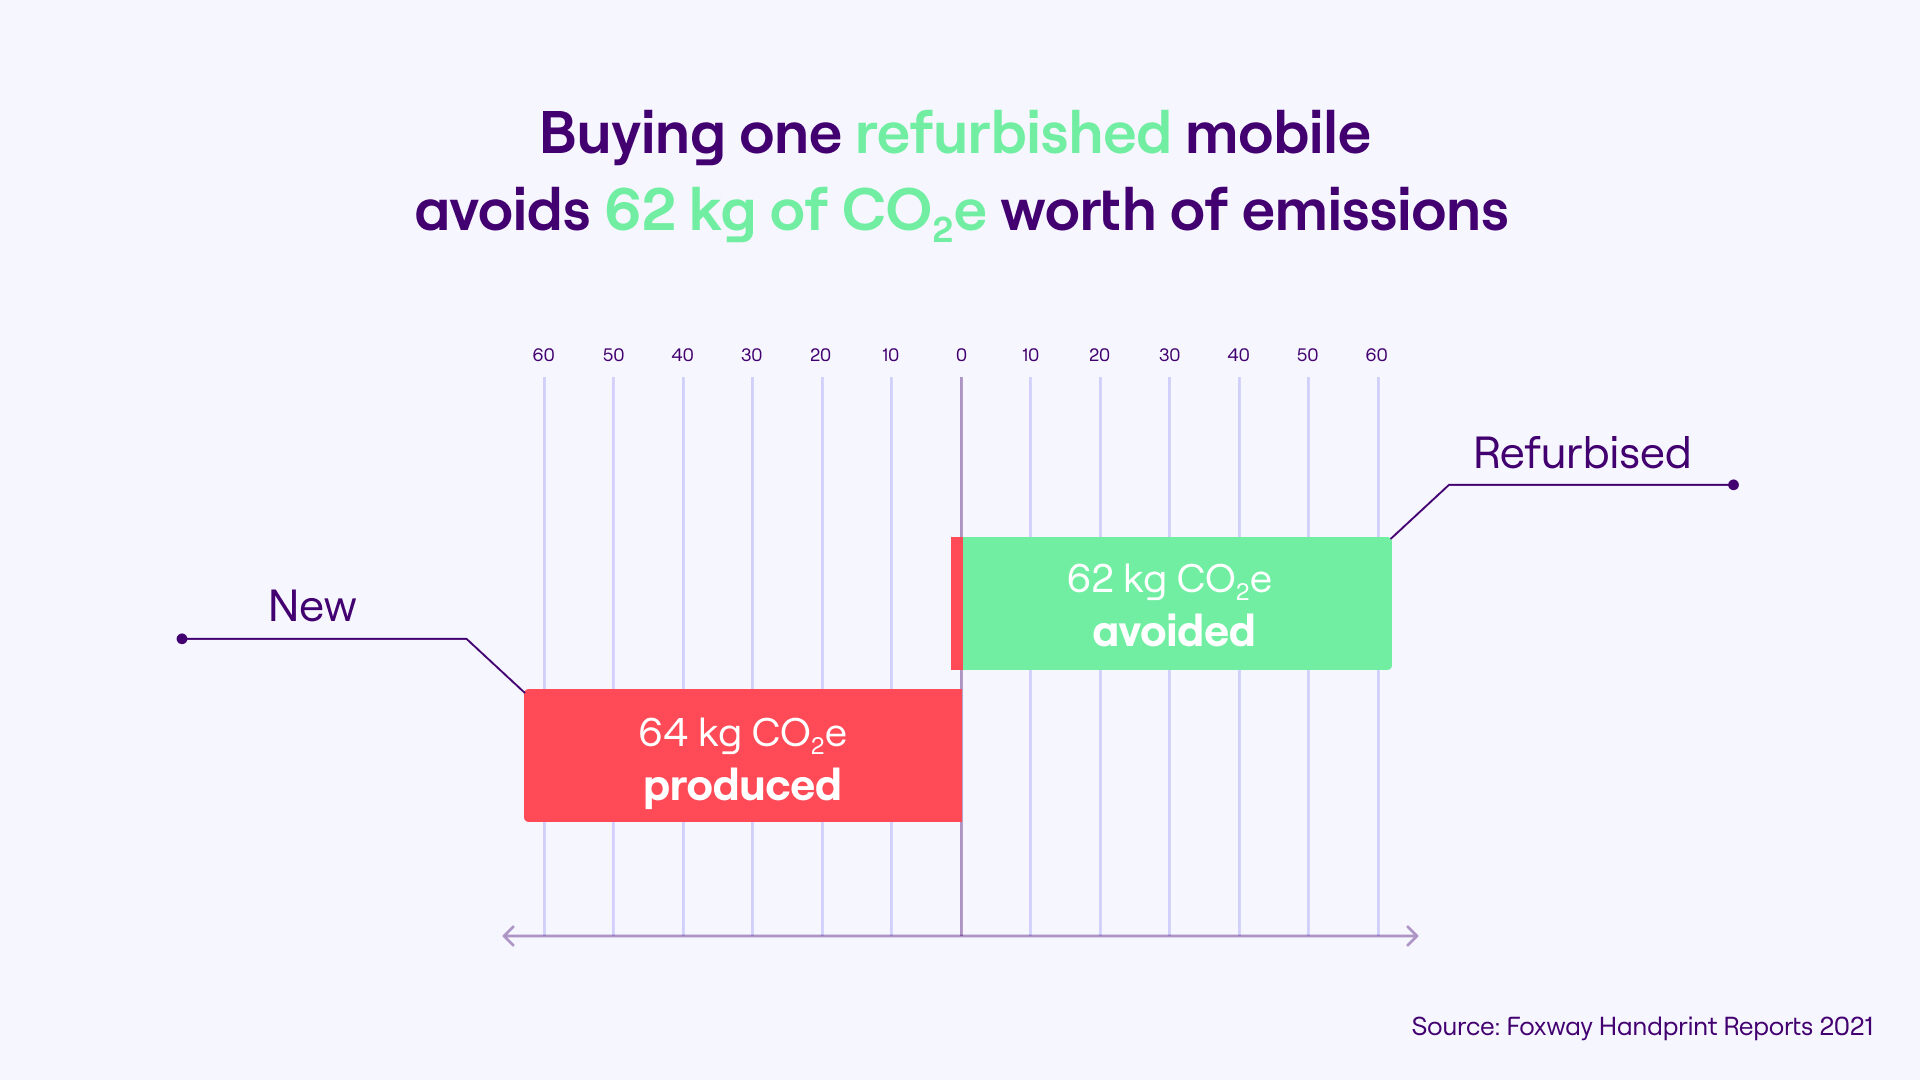 How Extending Smartphone Lifespans Can Combat CO2 Emissions